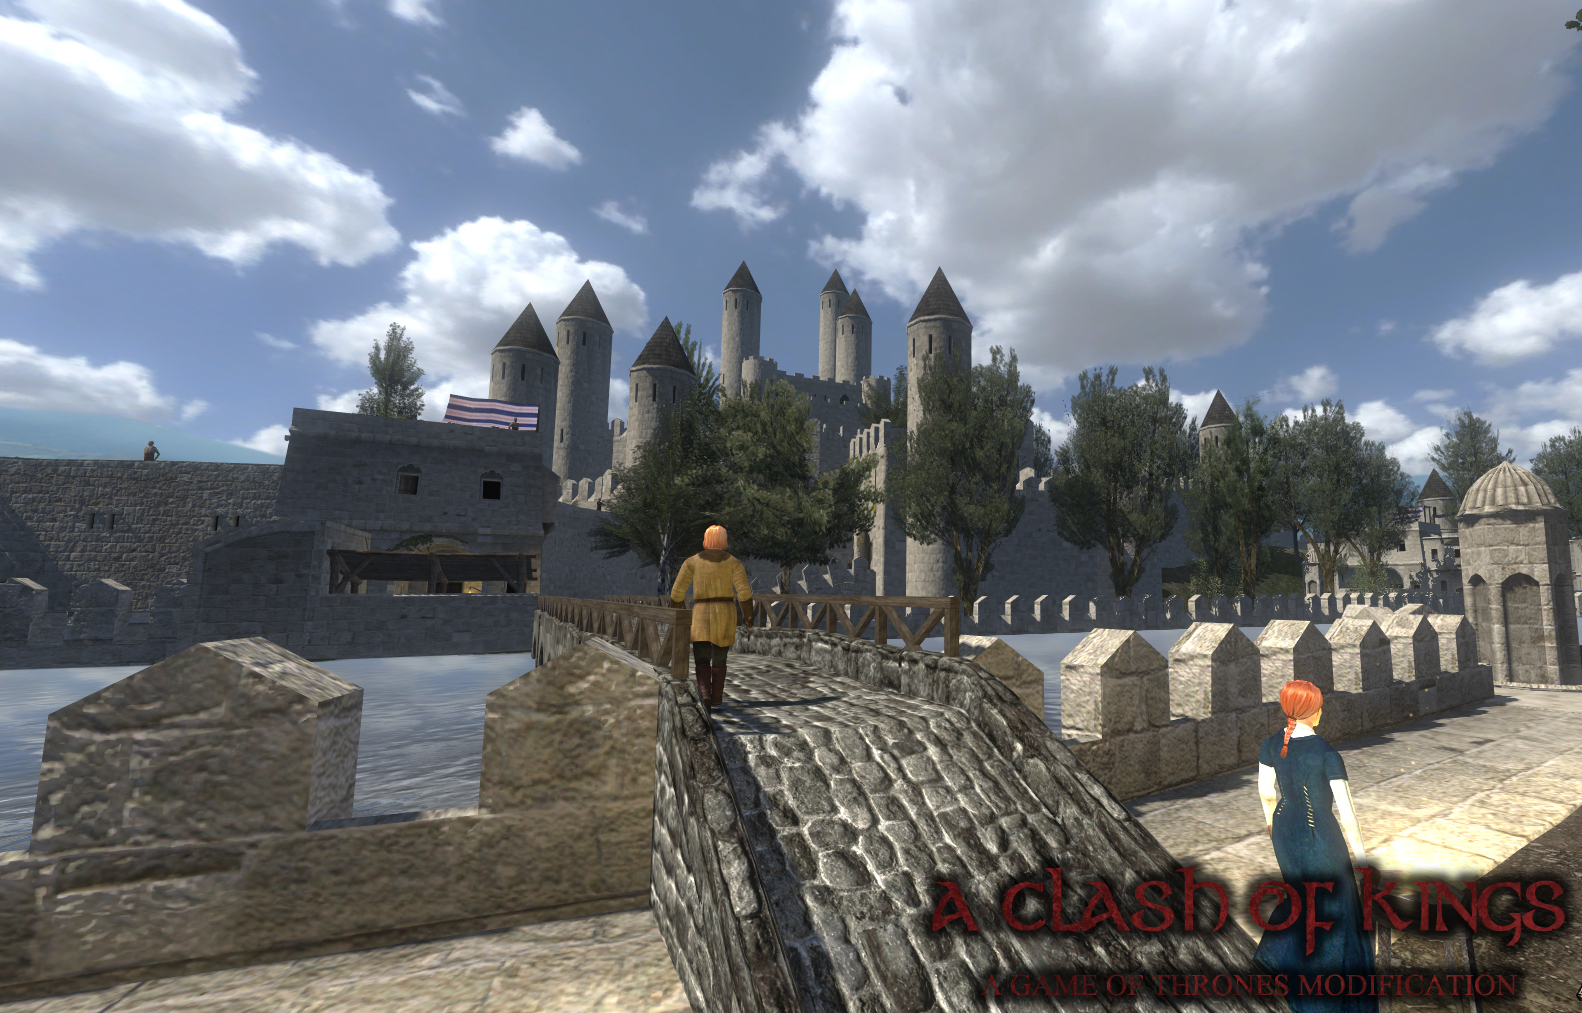 Highgarden Image A Clash Of Kings Game Of Thrones Mod For Mount Blade Warband Mod Db